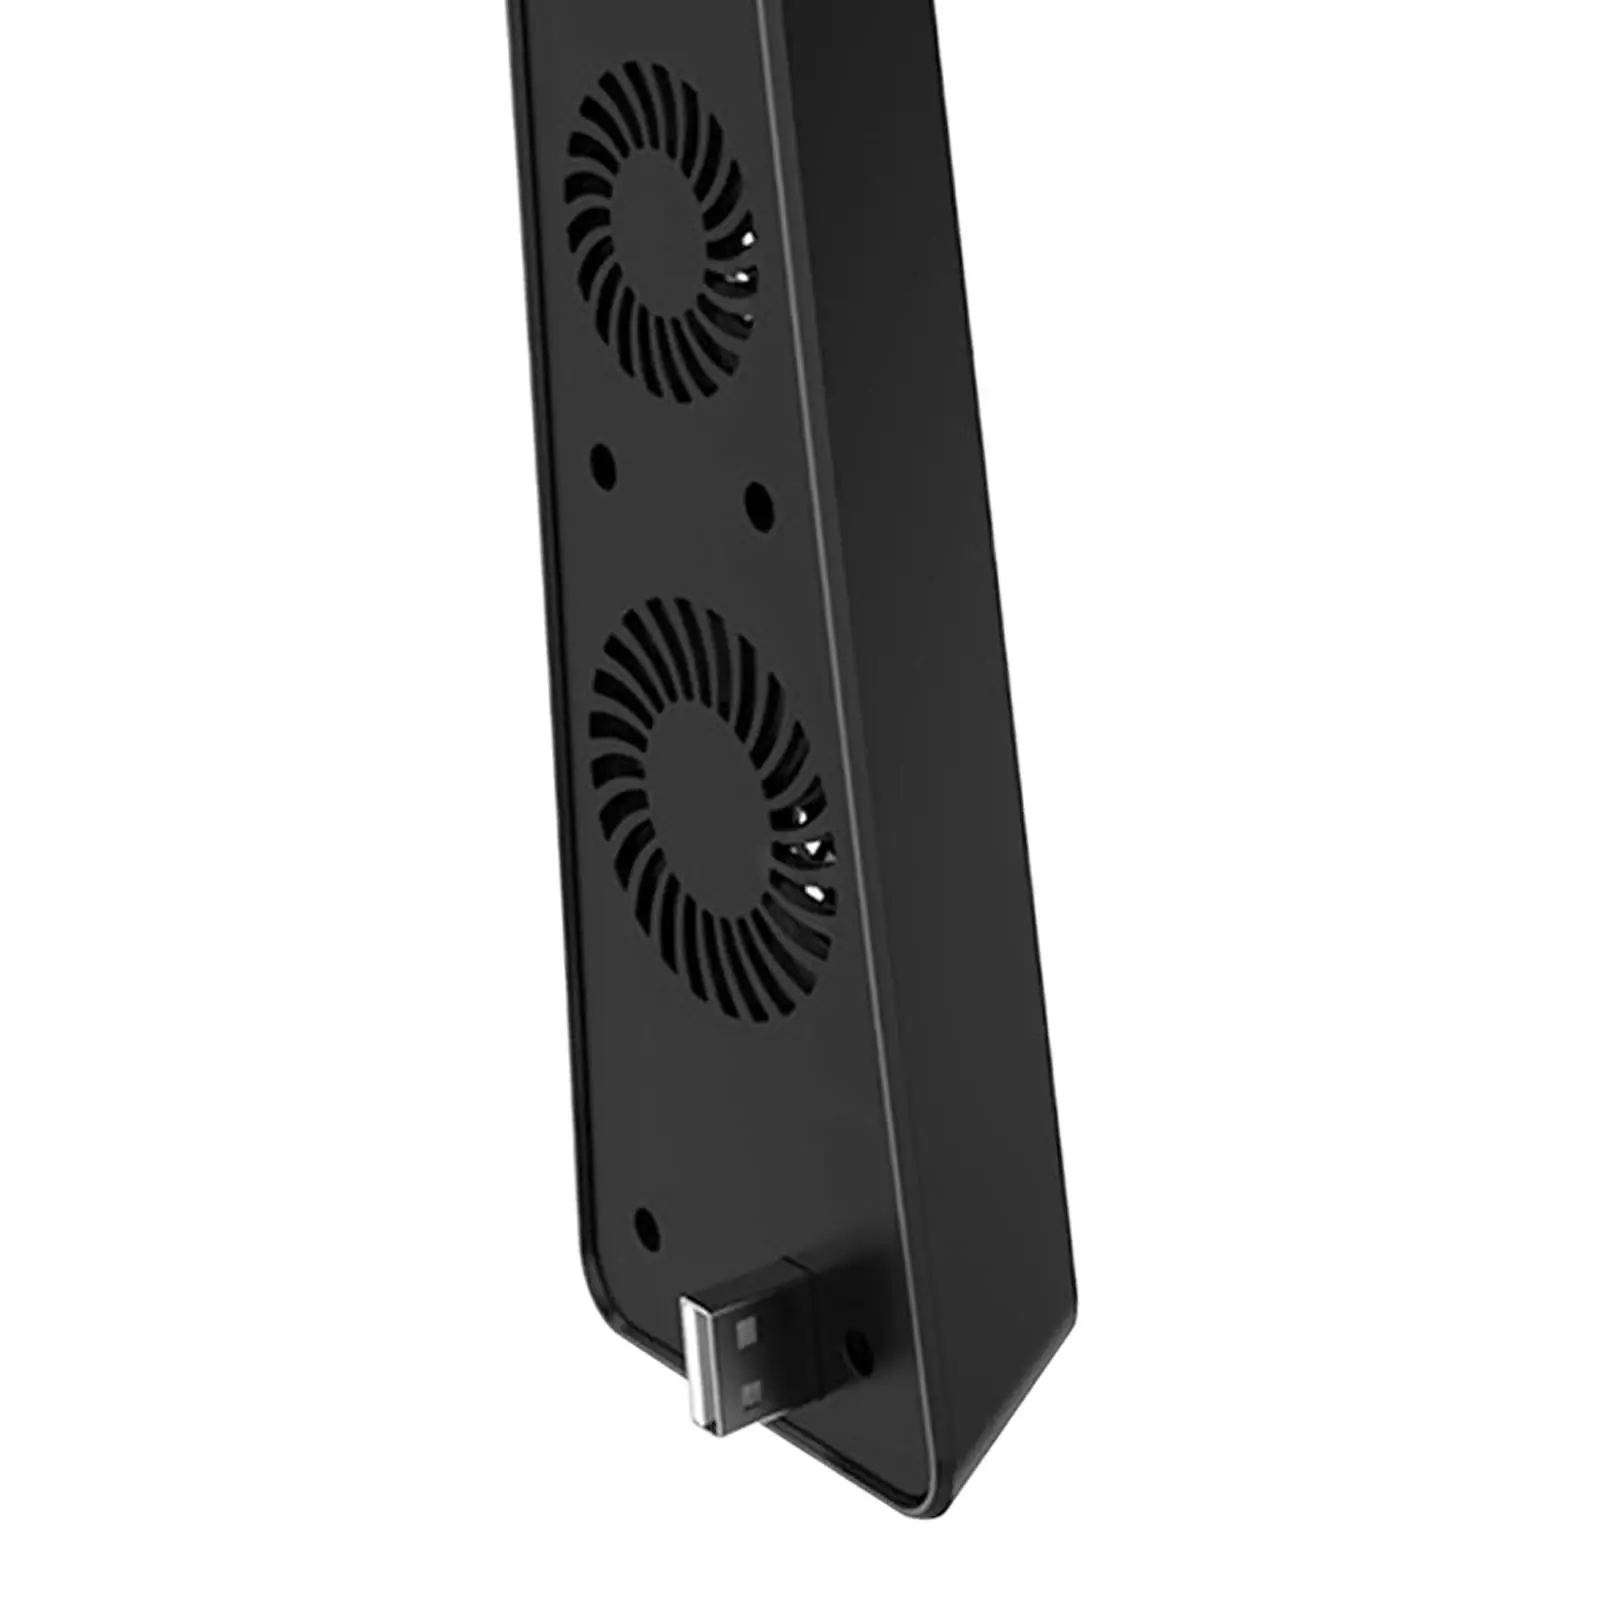 Upgraded Cooling Fan with LED Light Horizontal Quiet 3 High Speed Fans Cooler Cooling Accessories for Consoles Accessories